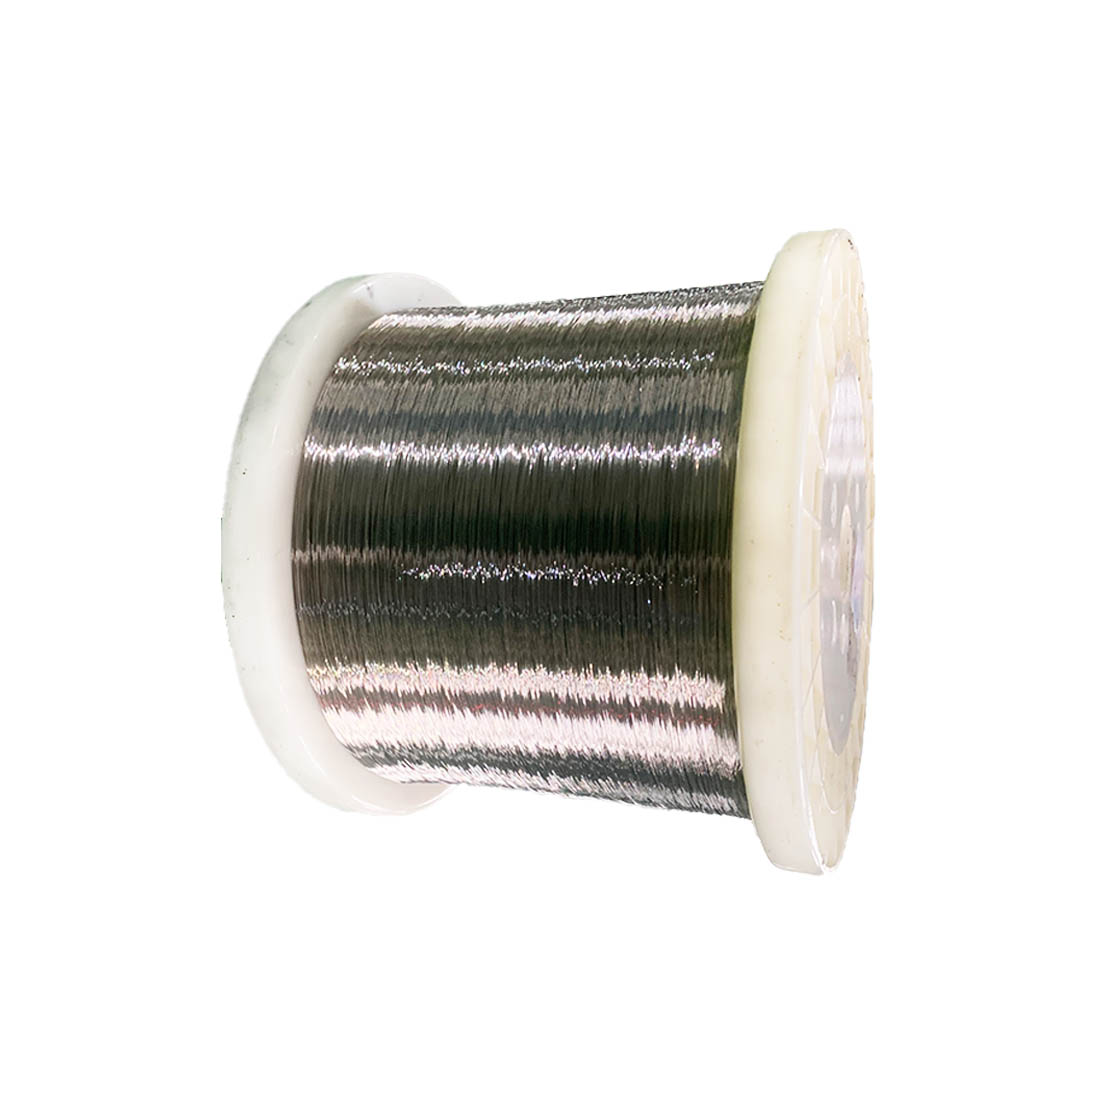 Nickel Plated Copper Wire 